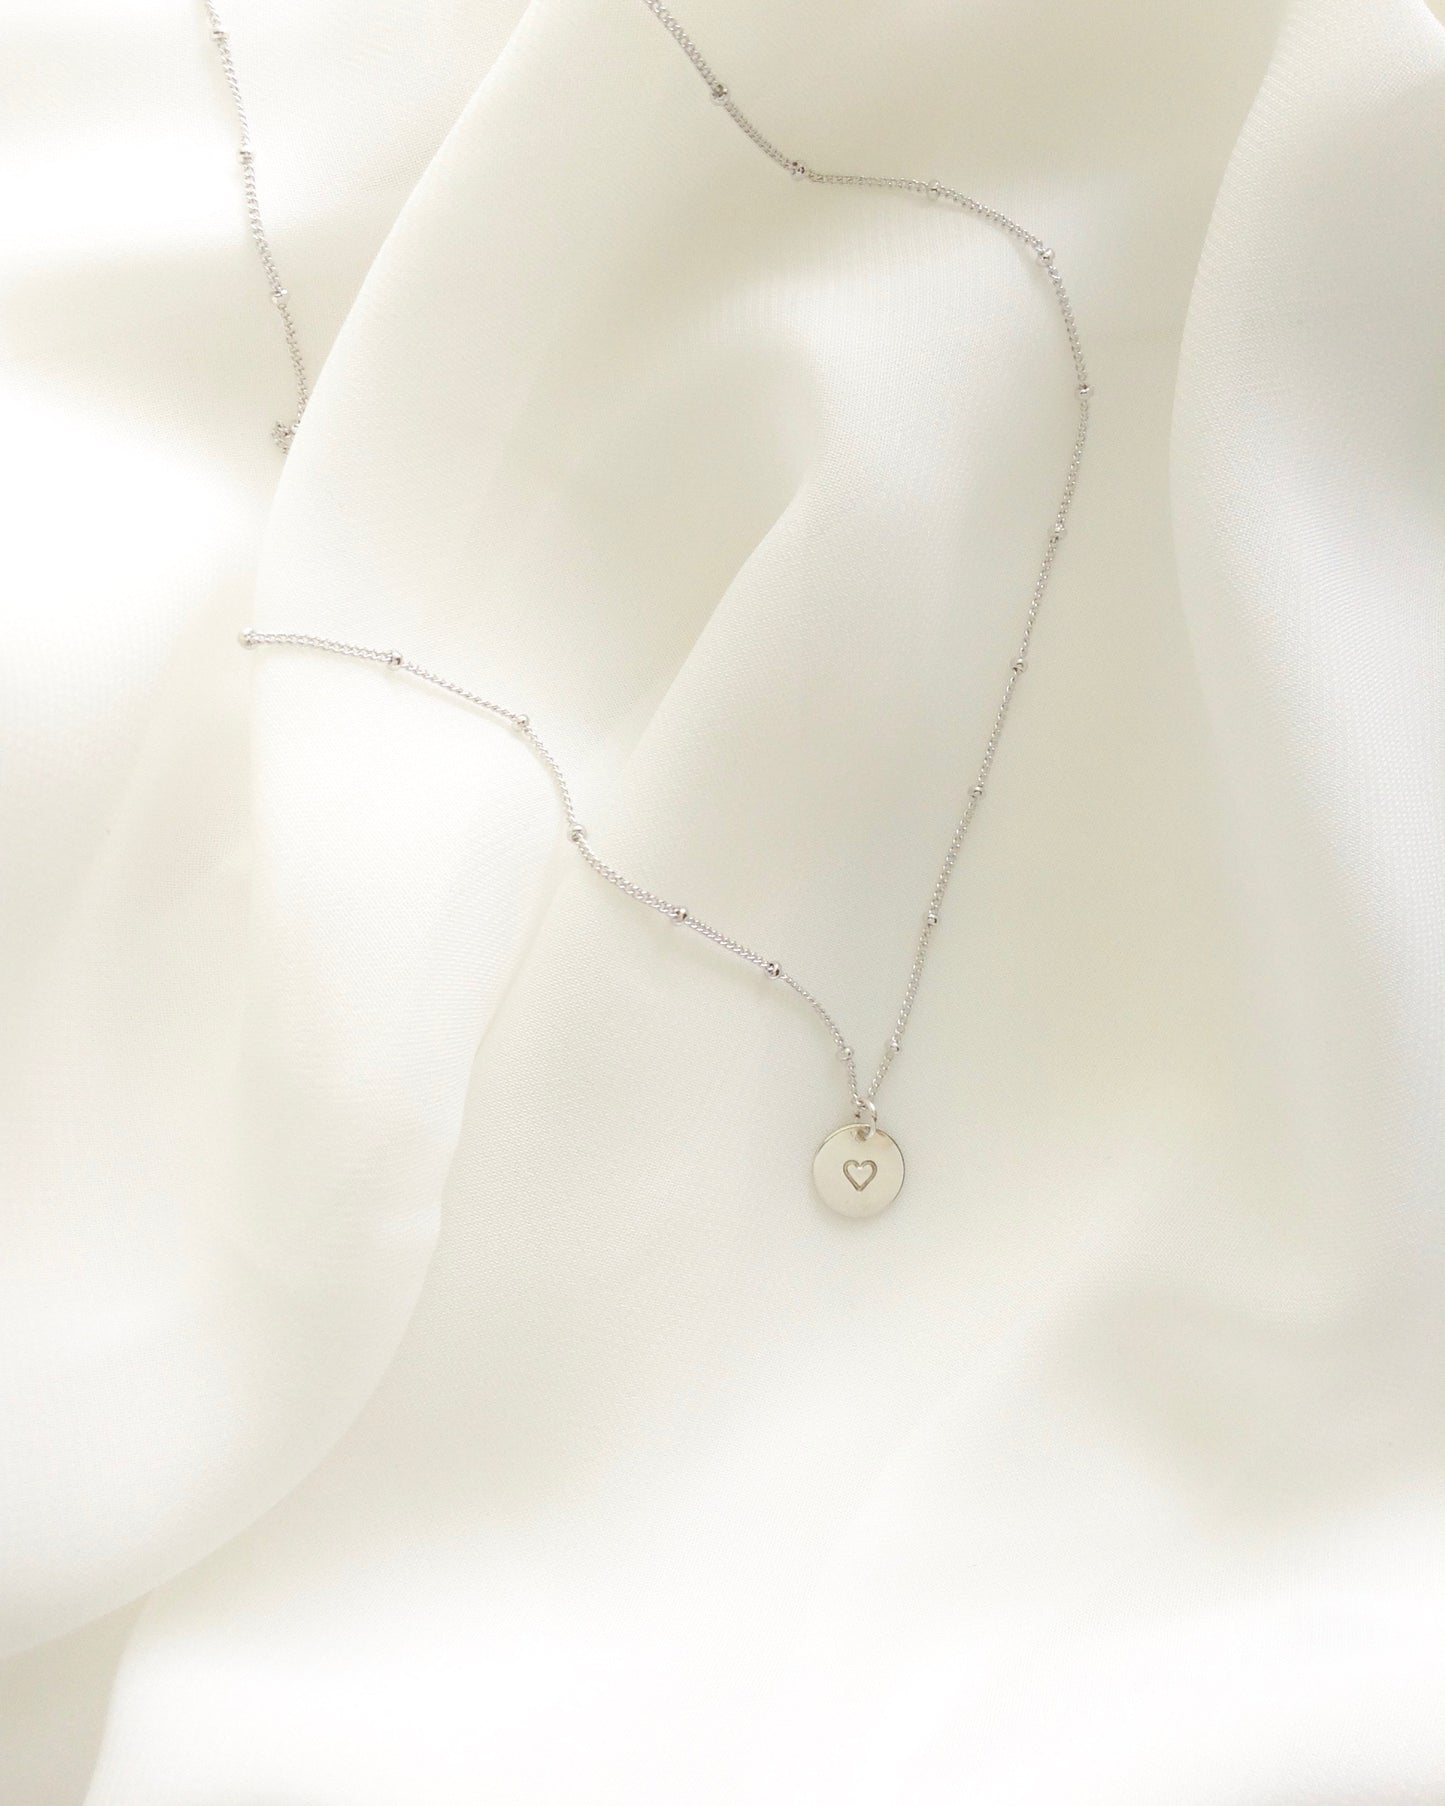 Tiny Heart Meaningful Necklace For Her | IB Jewelry